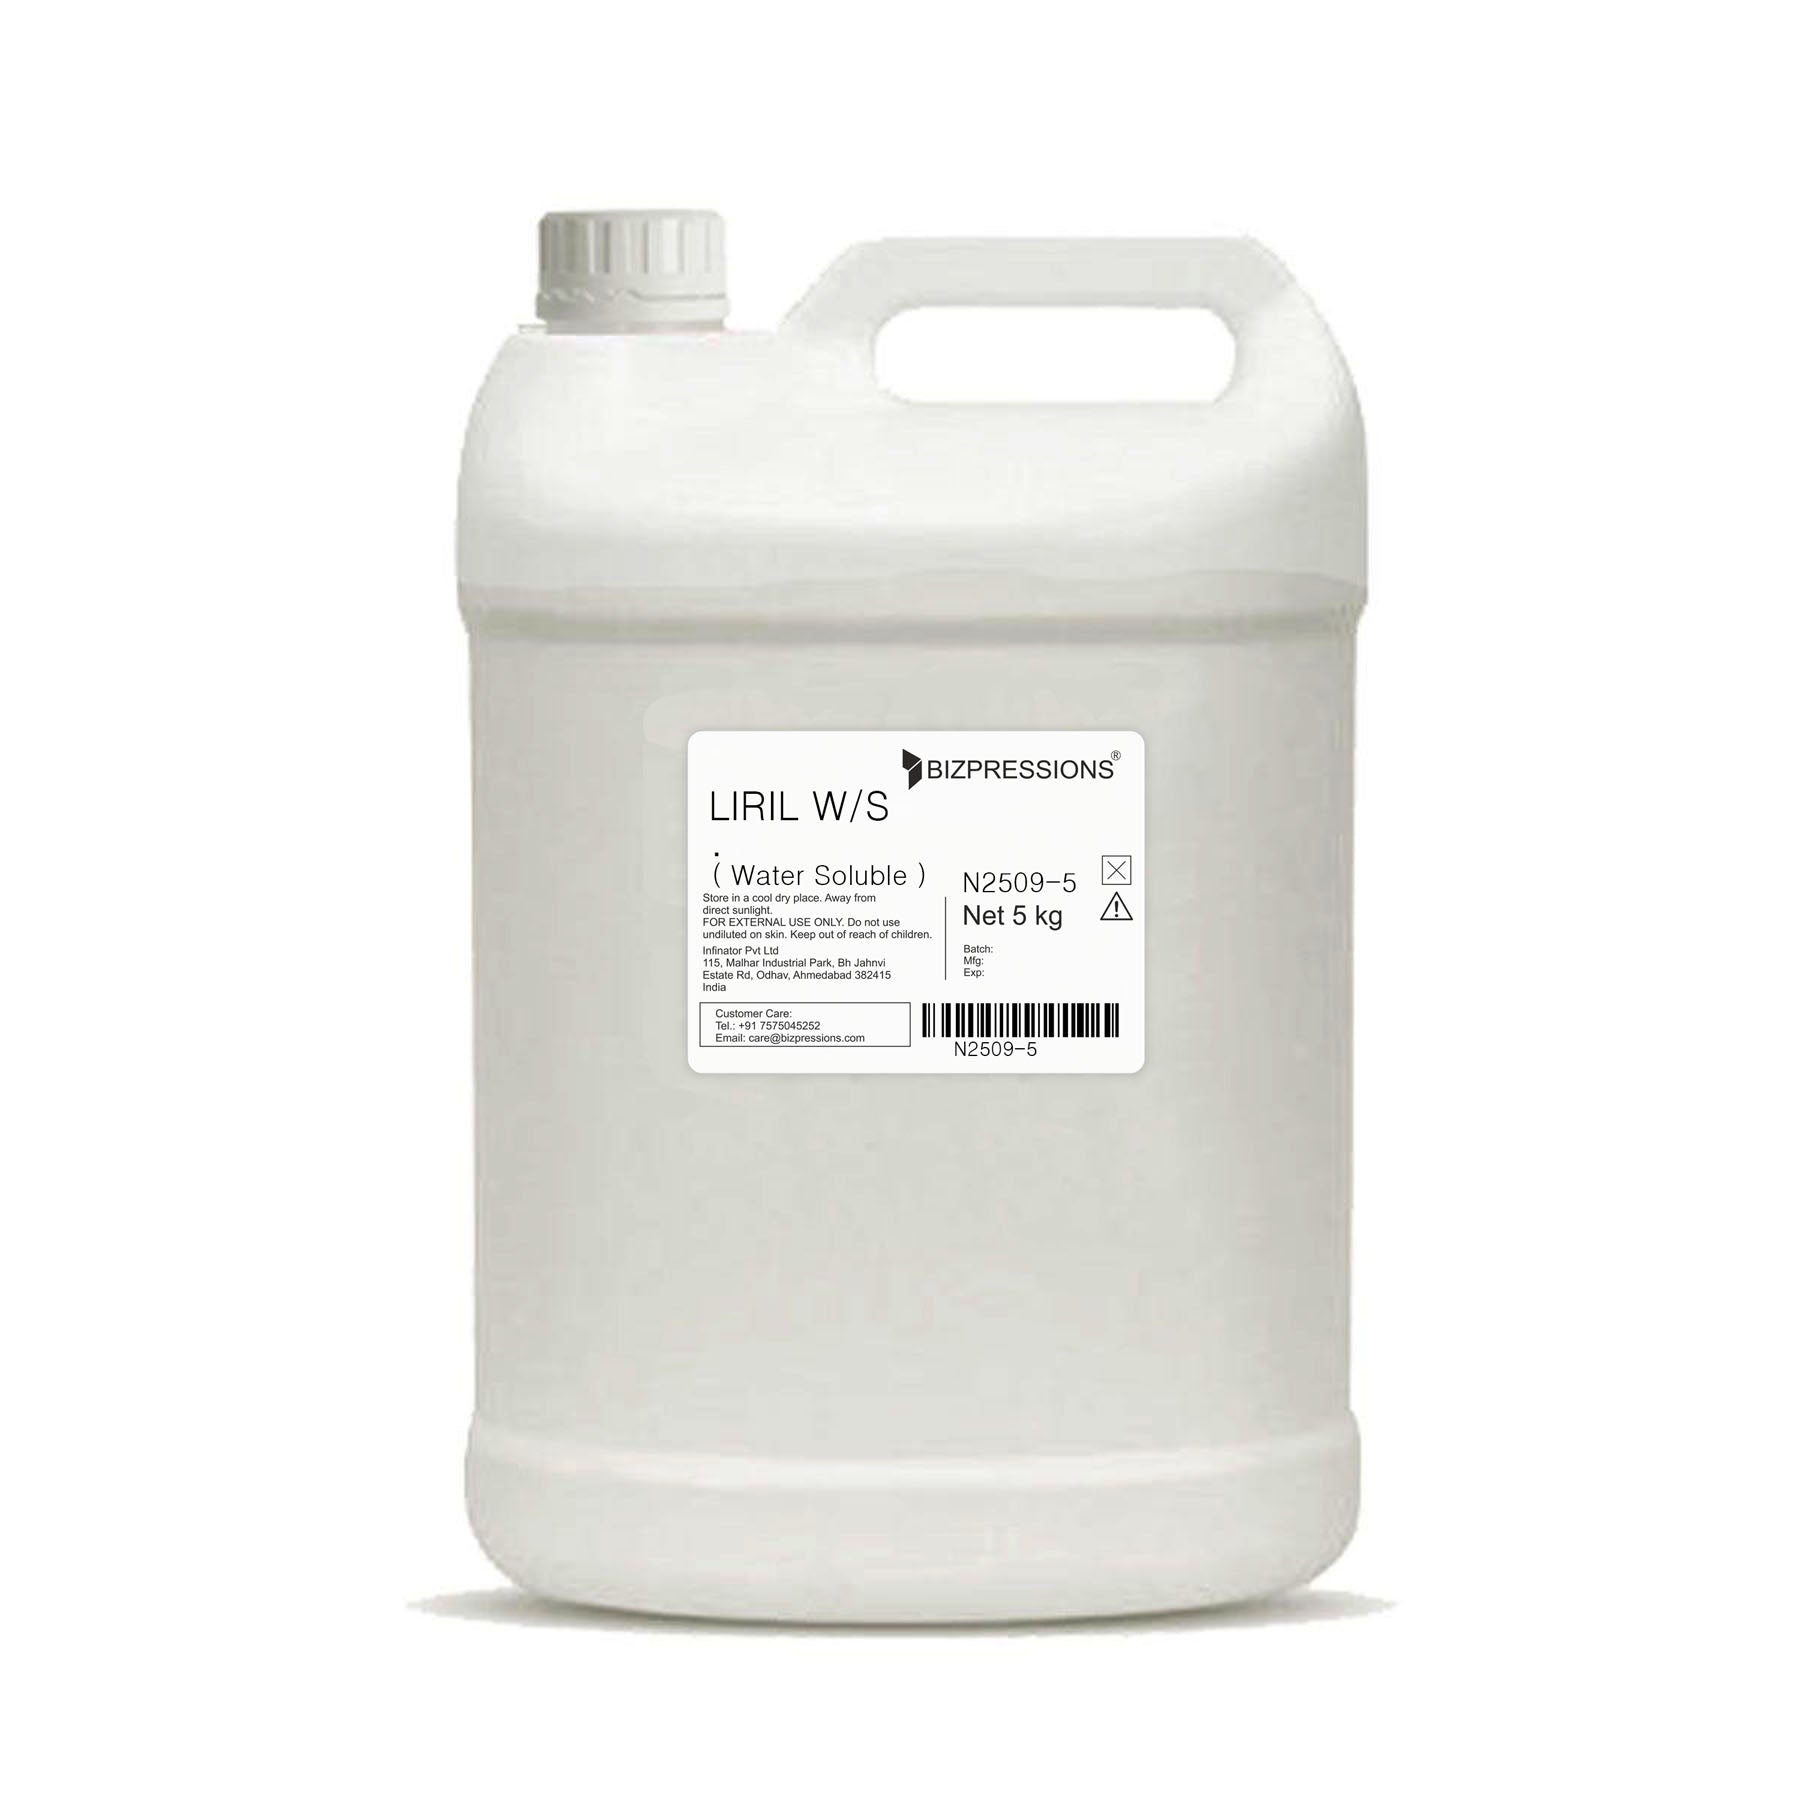 LIRIL W/S - Fragrance ( Water Soluble ) - 5 kg